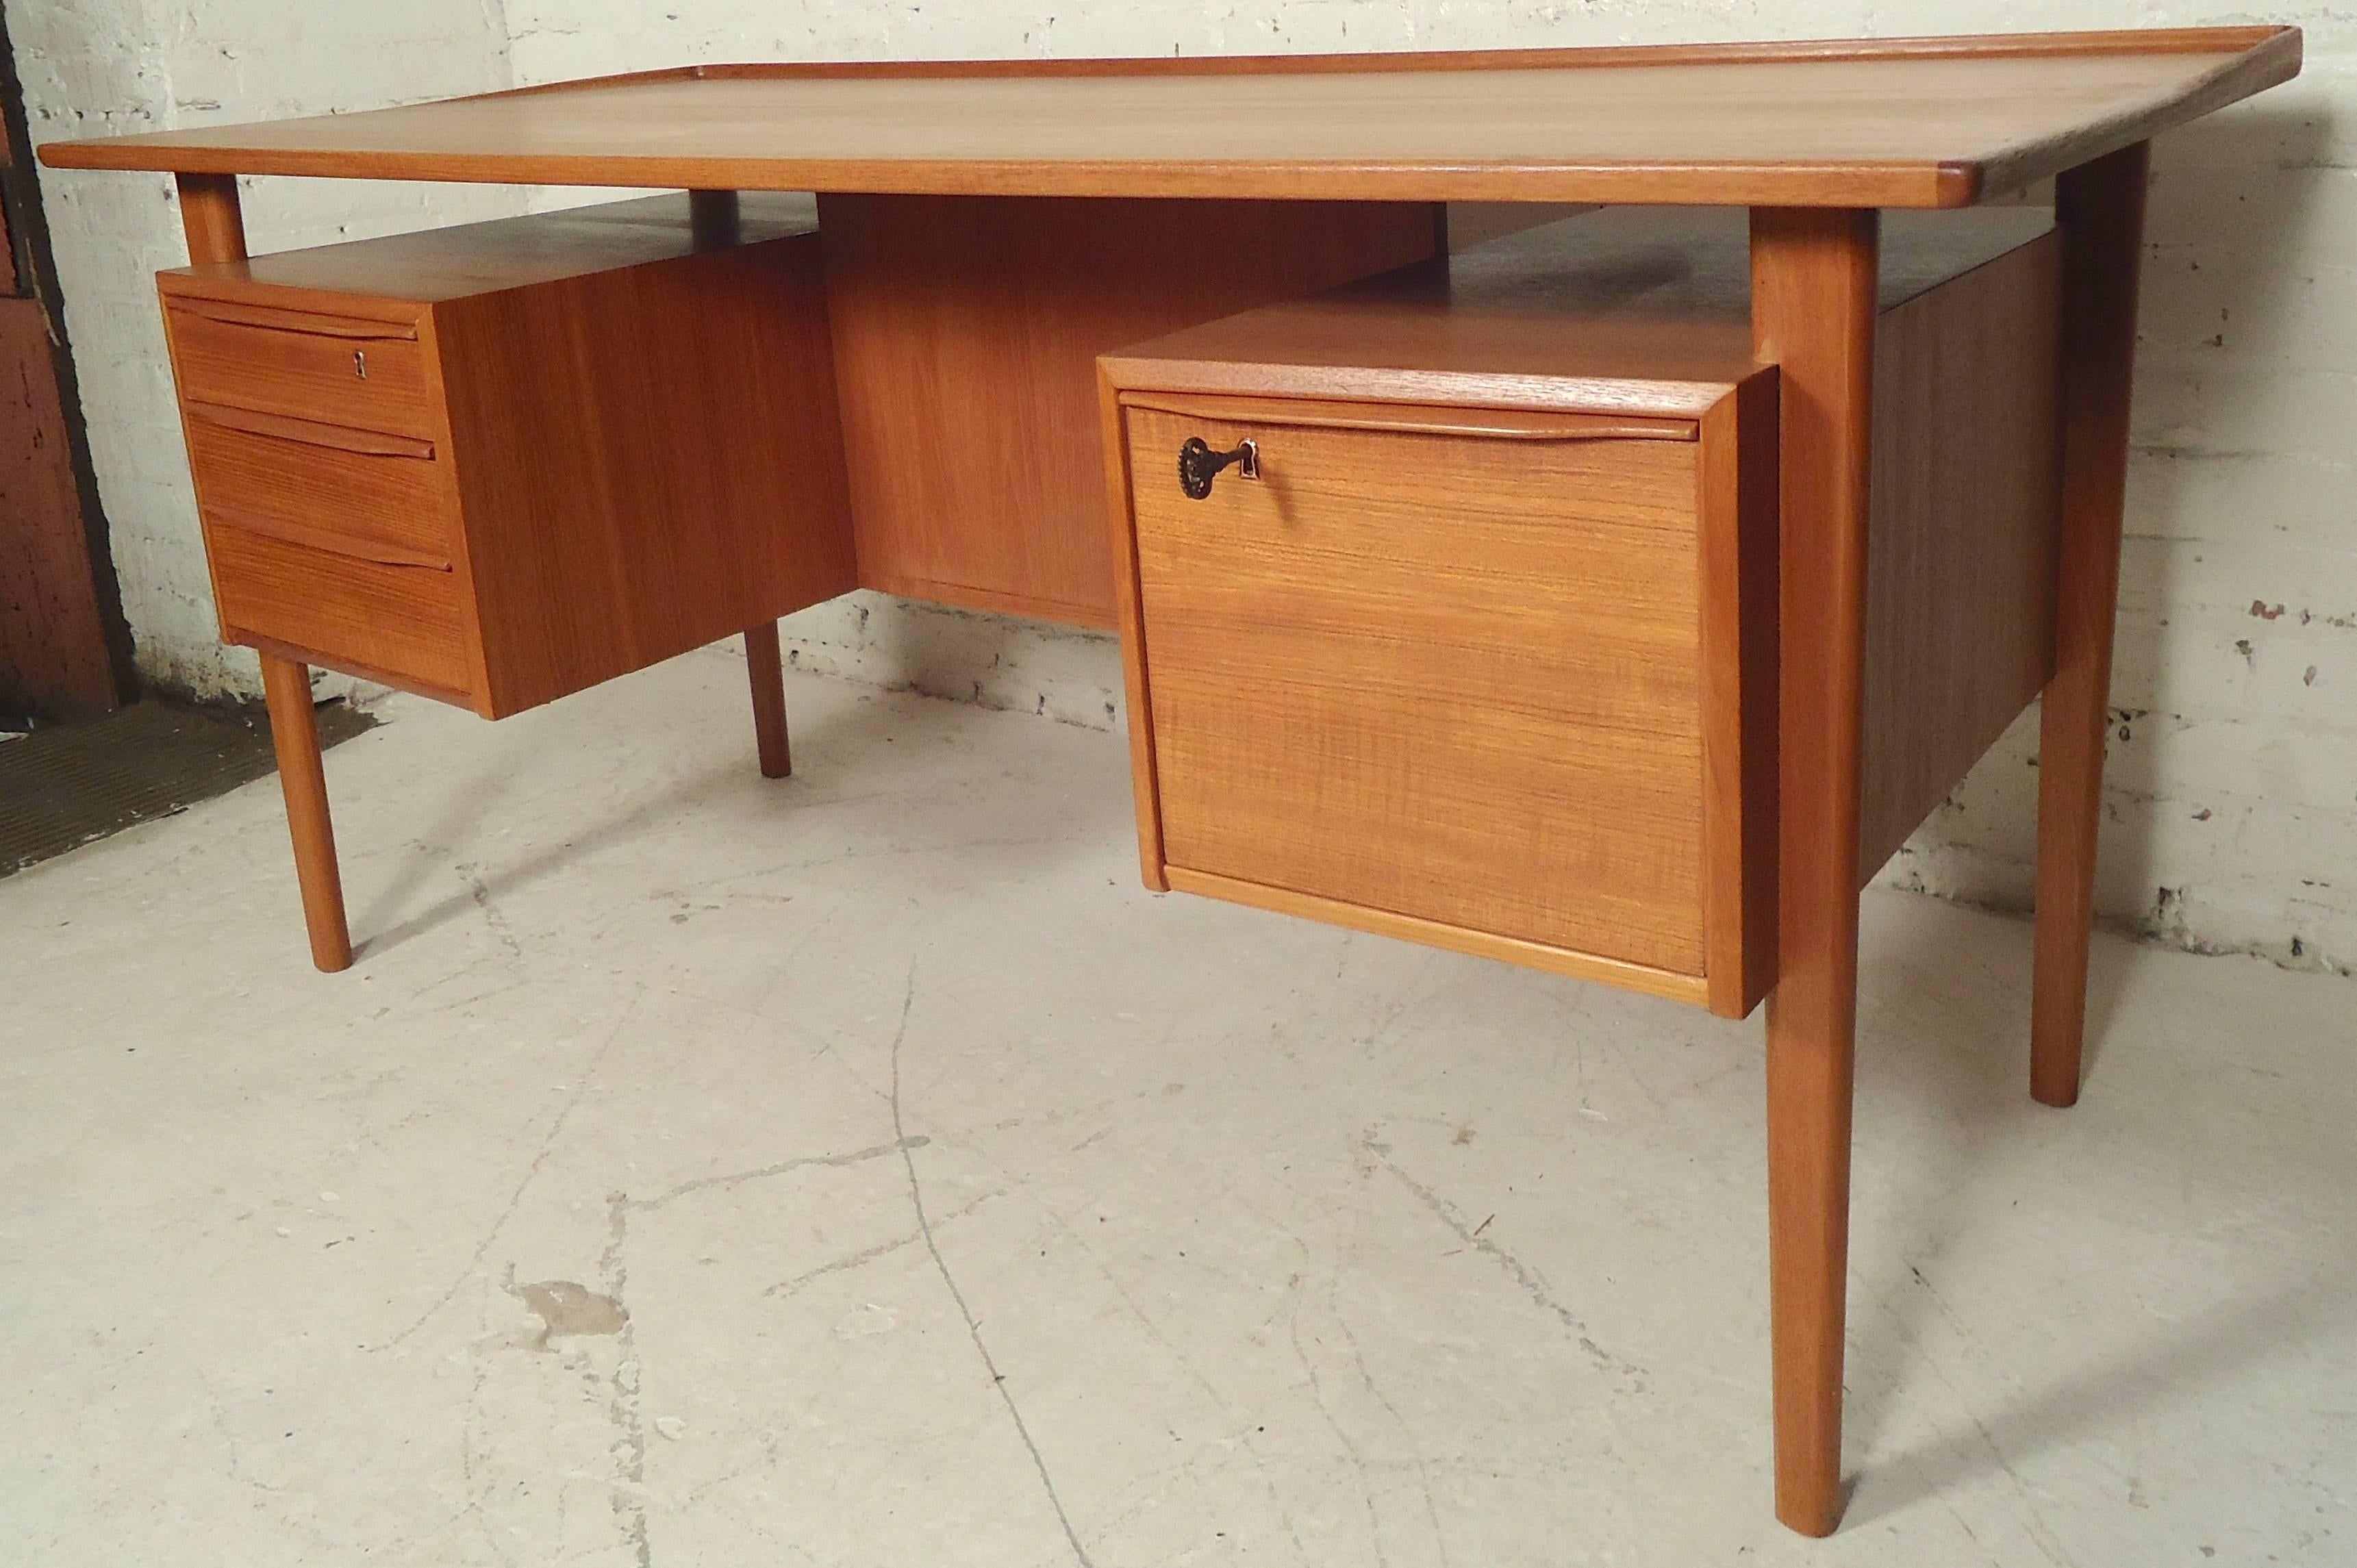 Mid-Century Modern teak desk by Peter Løvig Nielsen for Lovig Dansk with finished back. Features a floating top with curved trim, two banks of drawers, tapered legs, and handsome Danish modern style.
Kneehole: 23.5